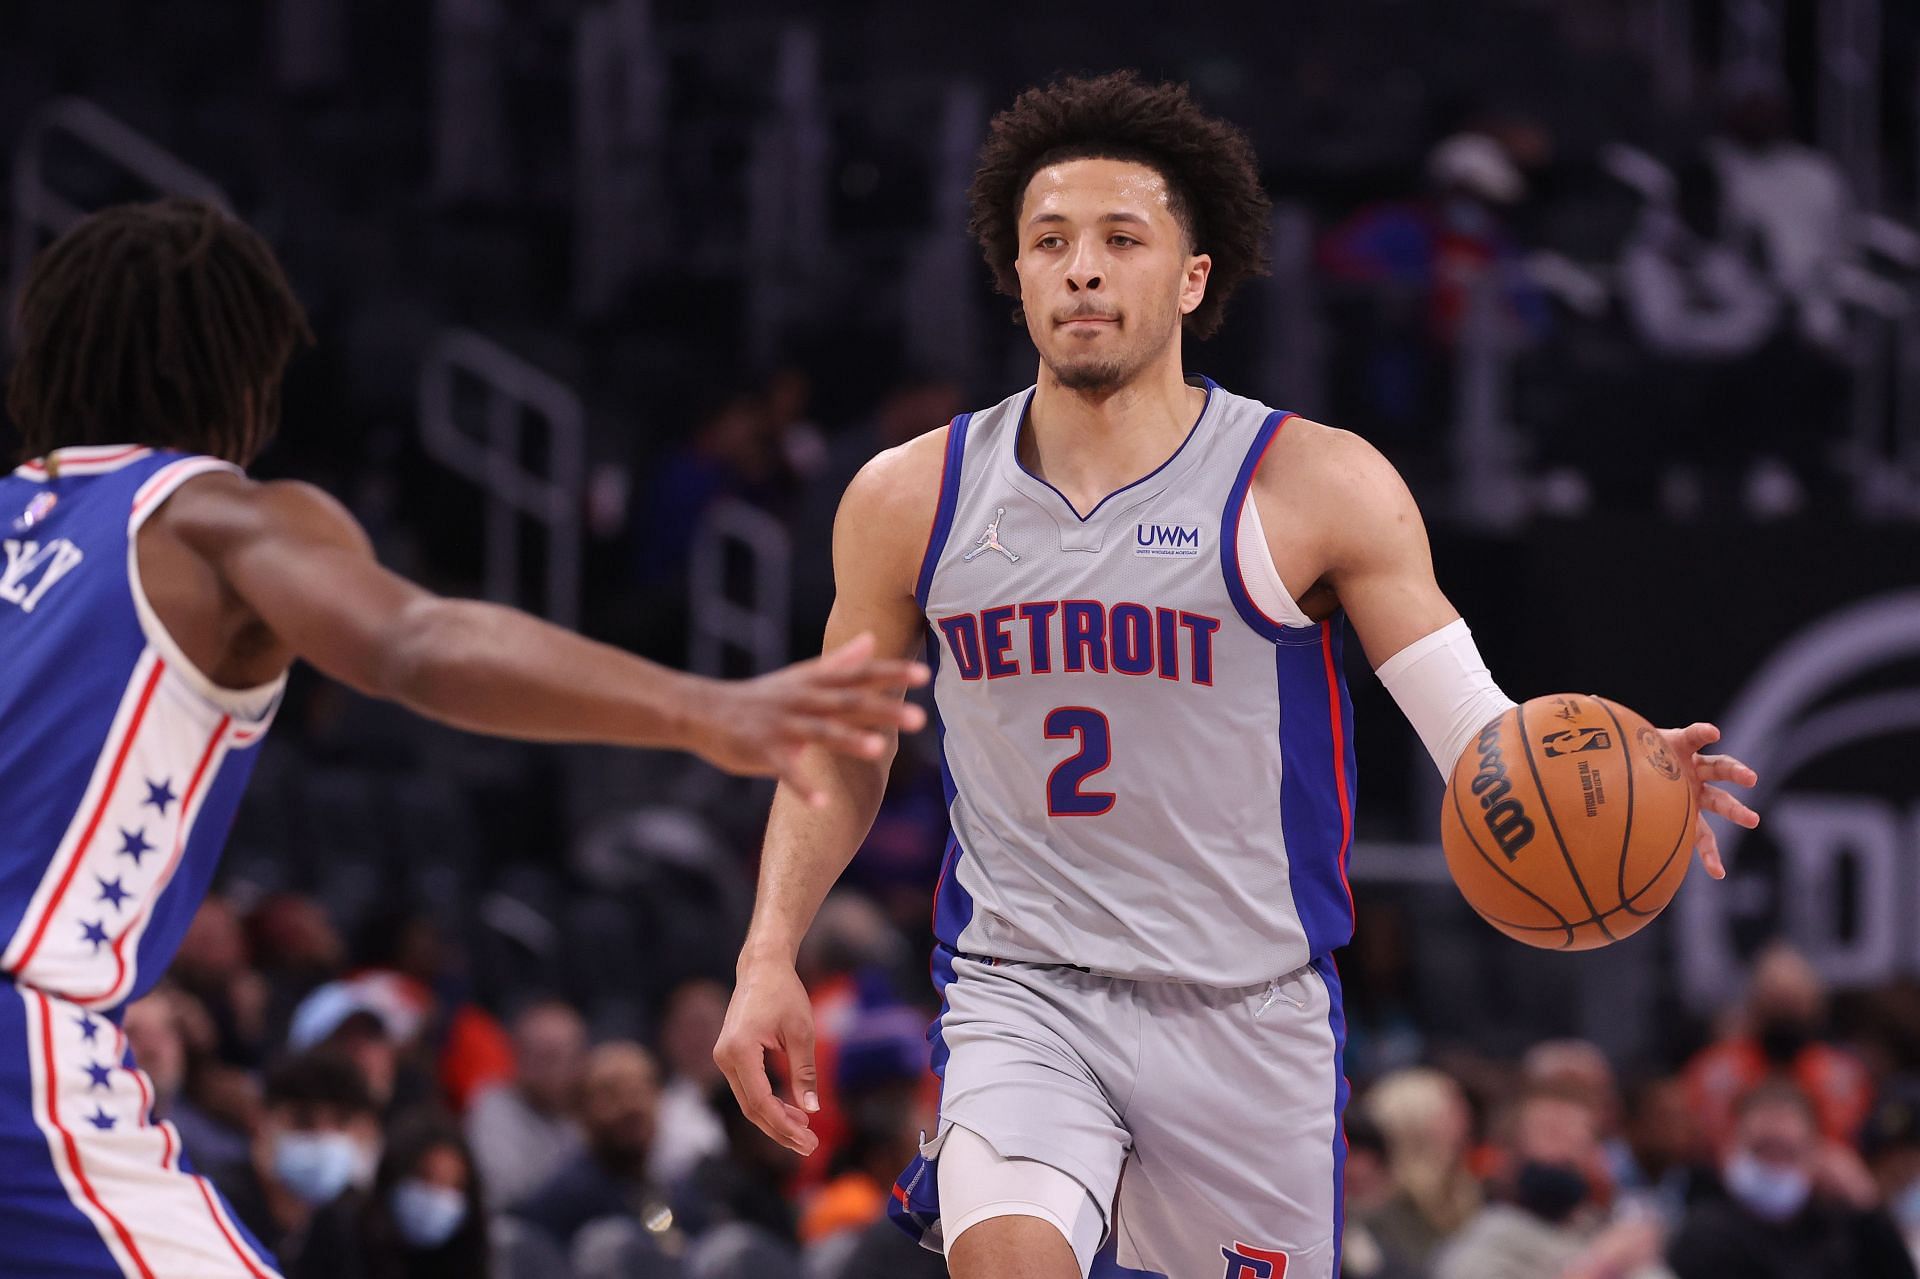 Detroit Pistons&#039; rookie Cade Cunningham scored 17 points in the game against the Brooklyn Nets